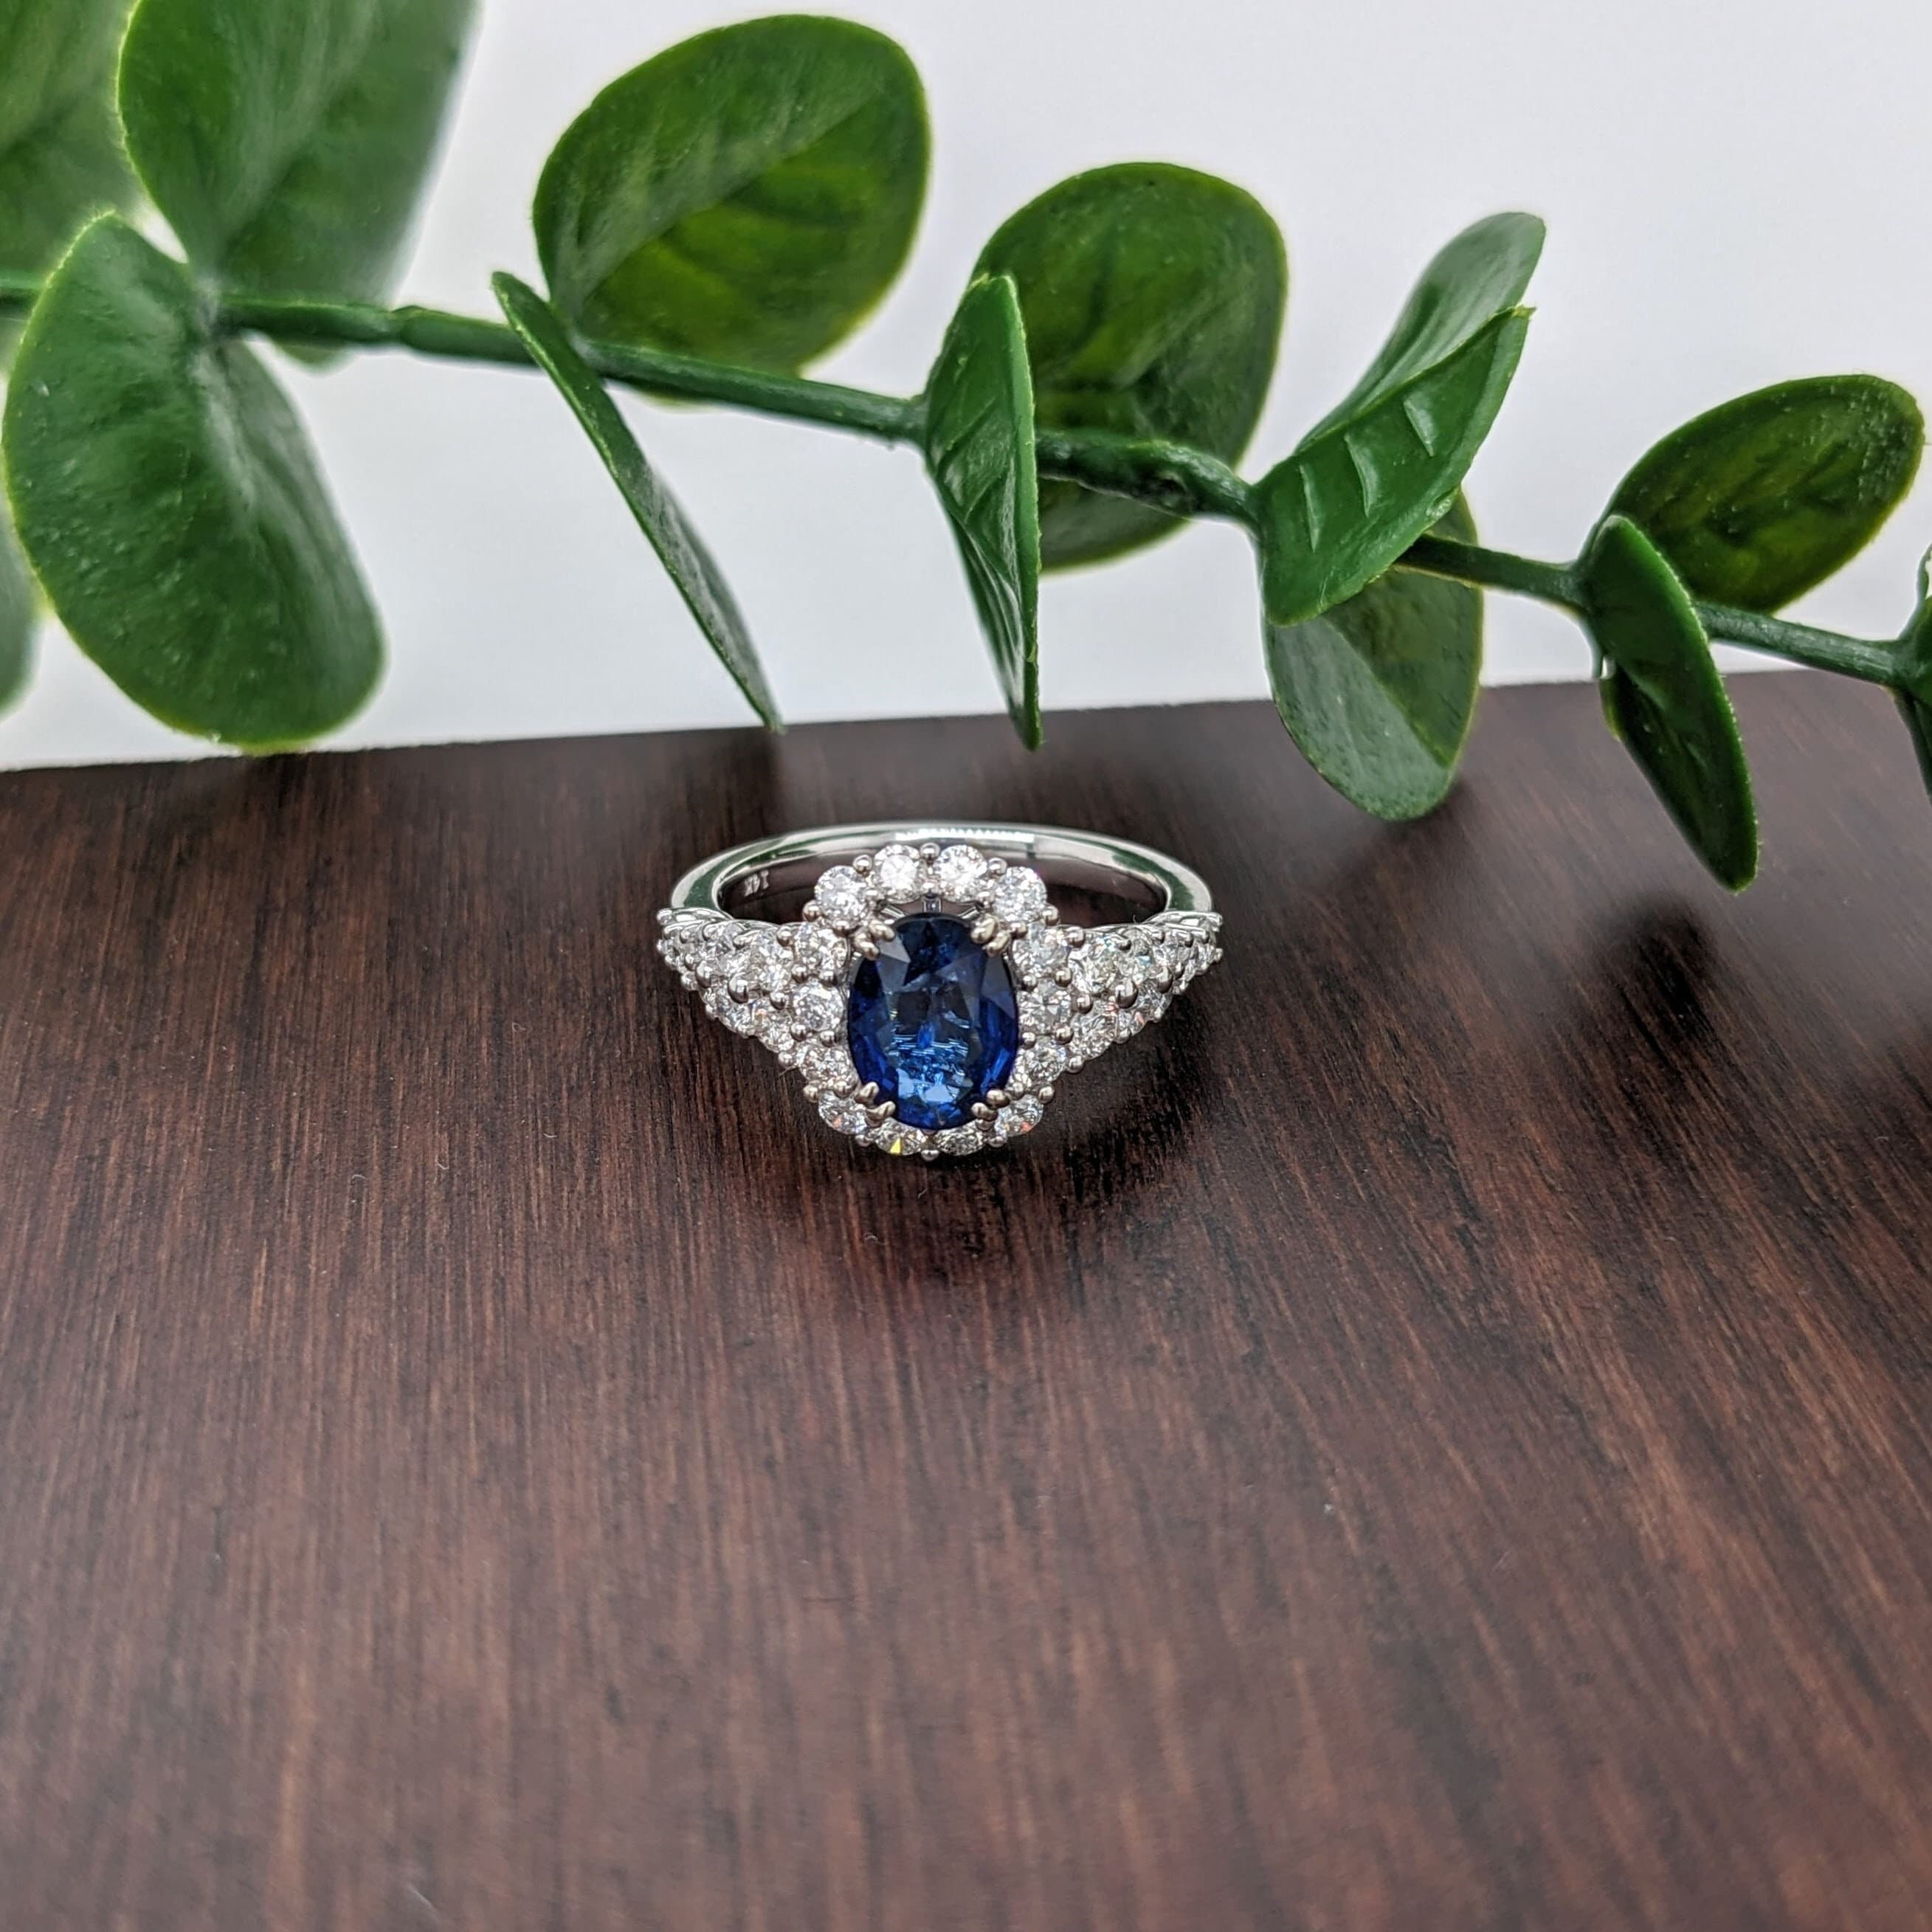 Pretty Oval Sapphire Ring w Natural Diamond Halo in Solid 14k White Gold | Blue Gemstone | Oval 7x5mm | Customizable | September Birthstone